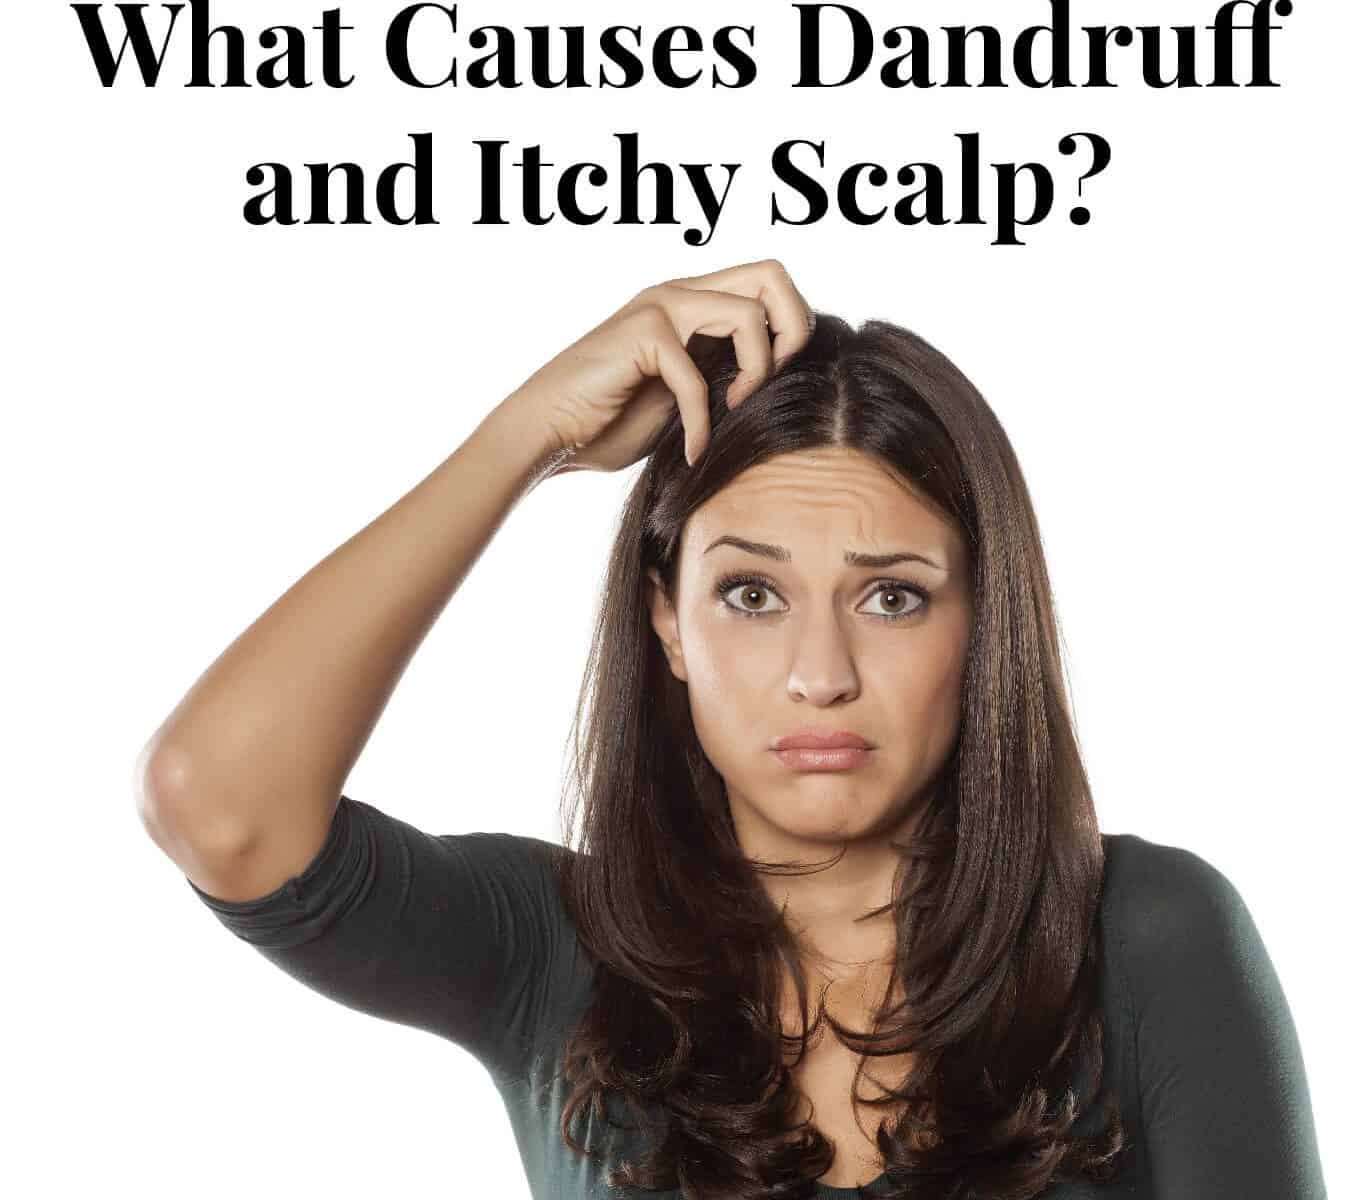 What Causes Dandruff and Itchy Scalp?